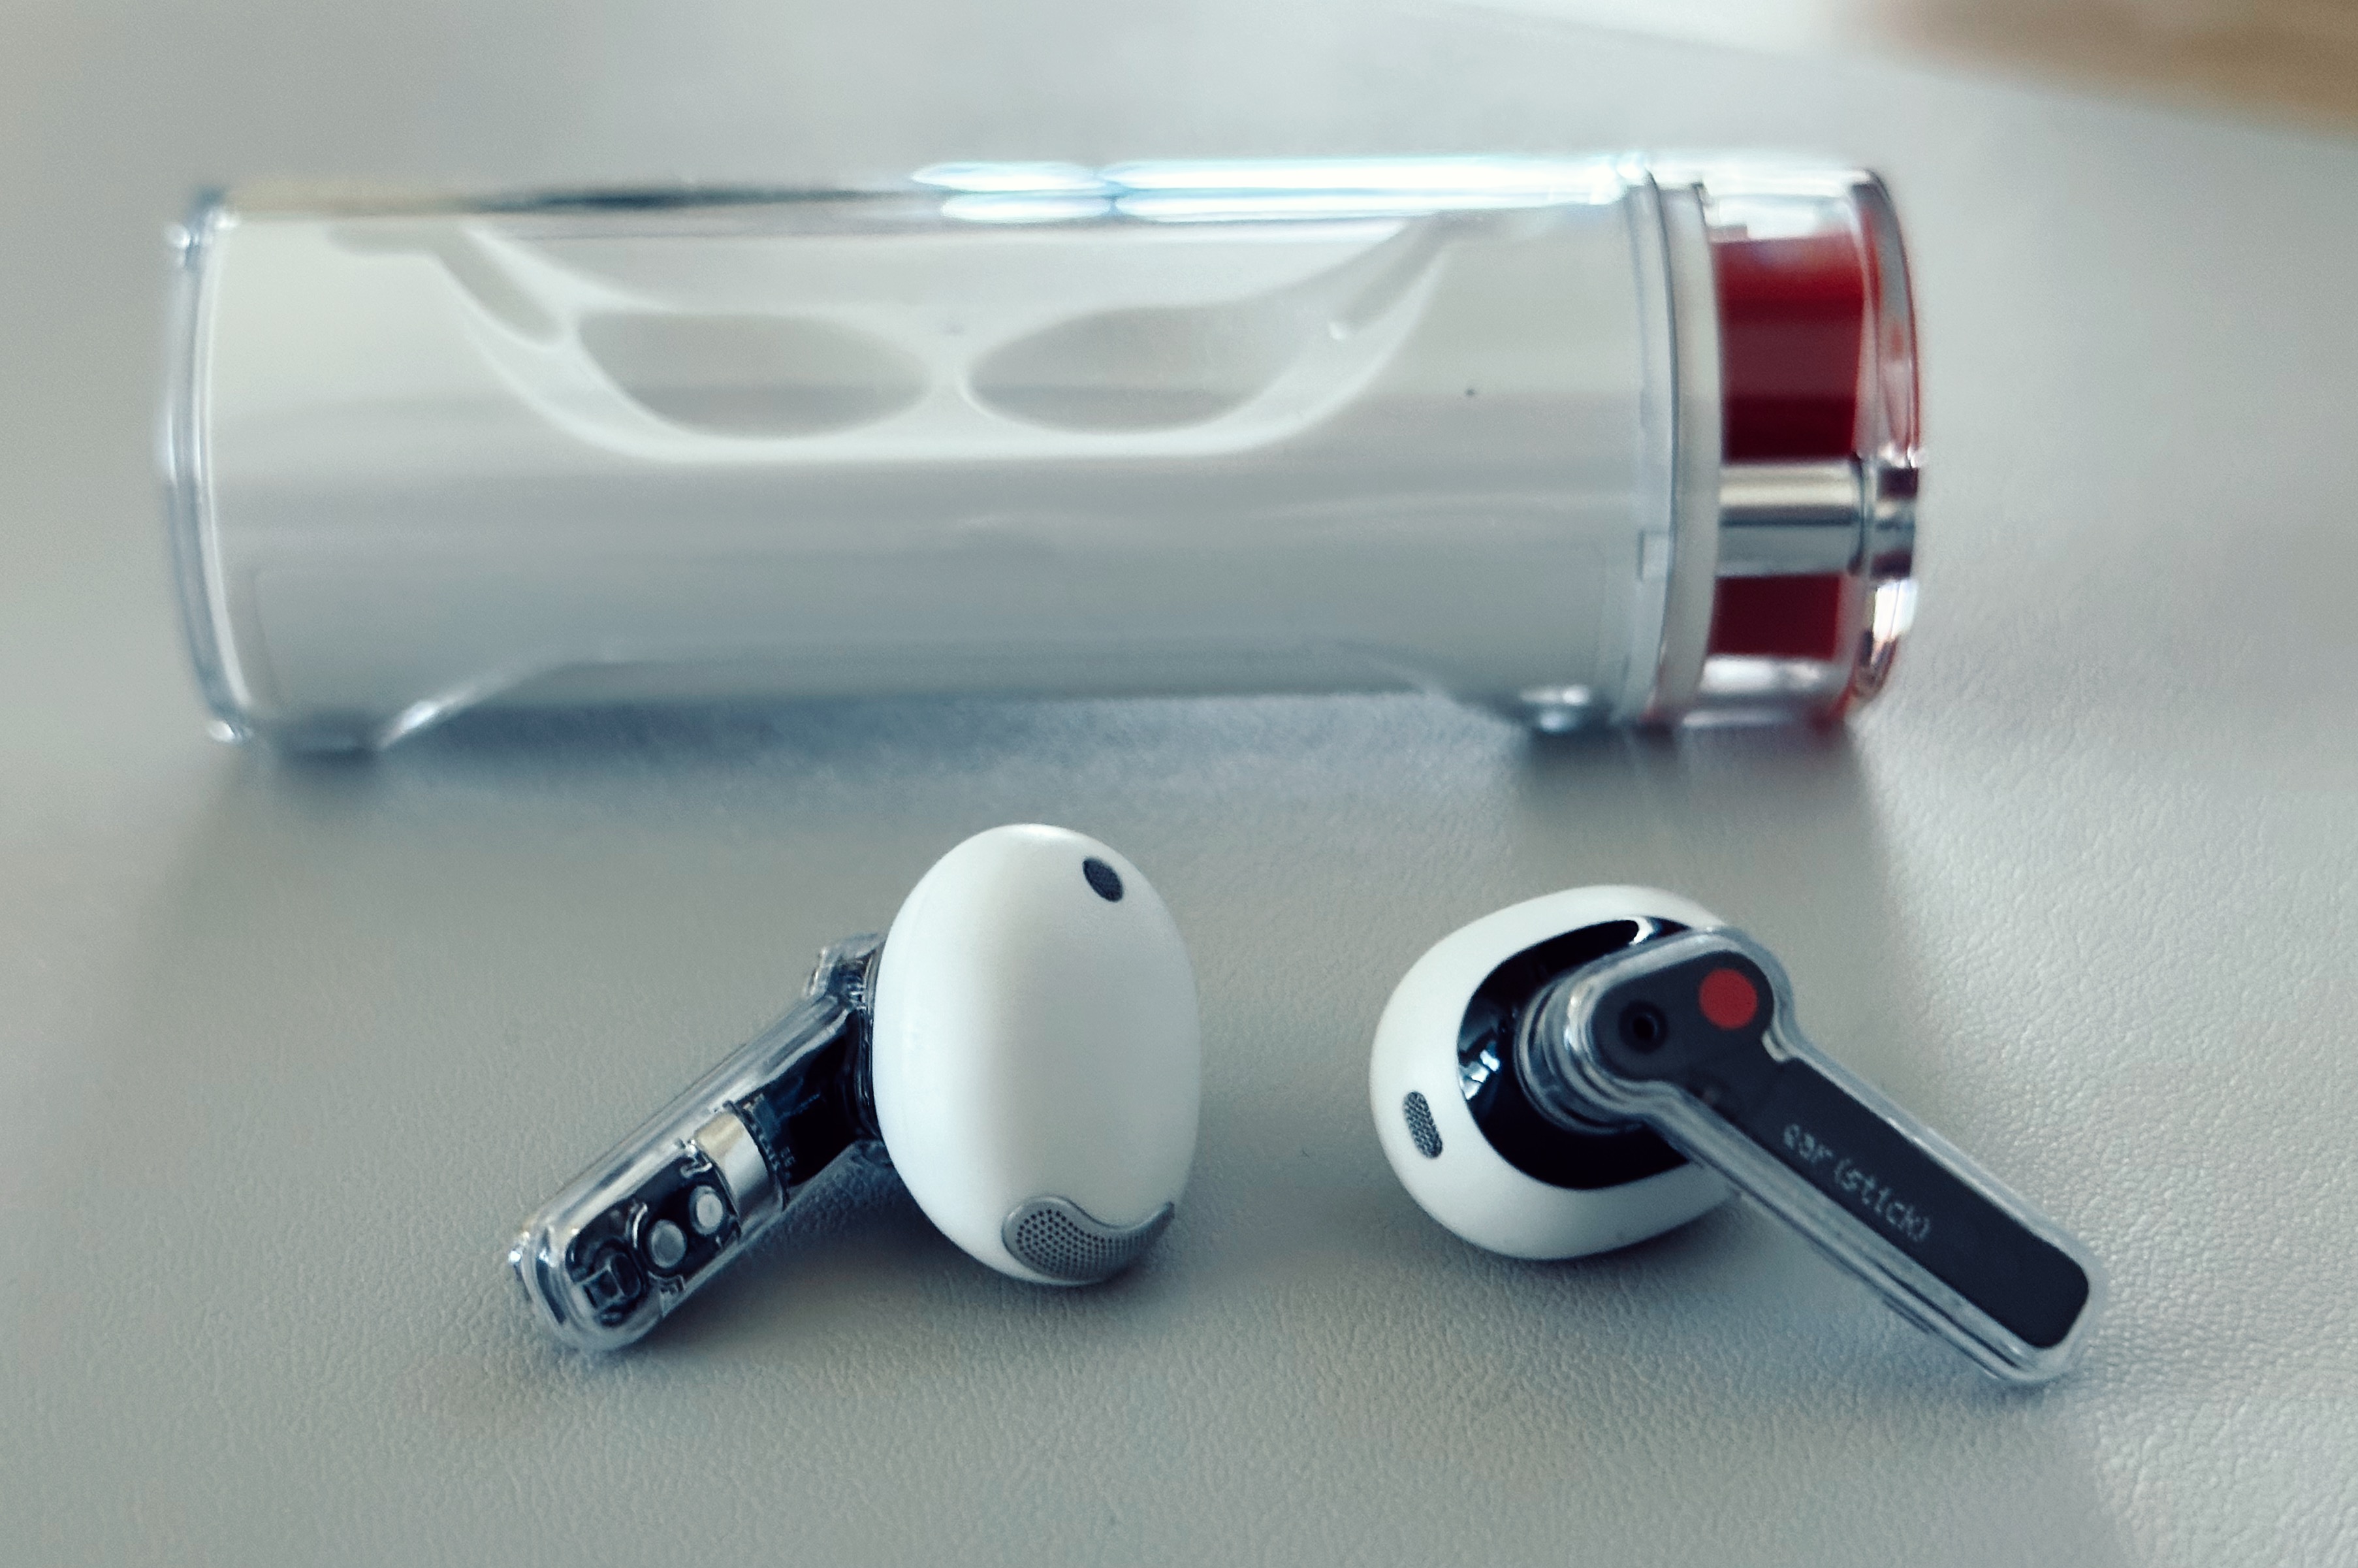 How Nothing designed its Ear 1 earphones to beat Apple's AirPods